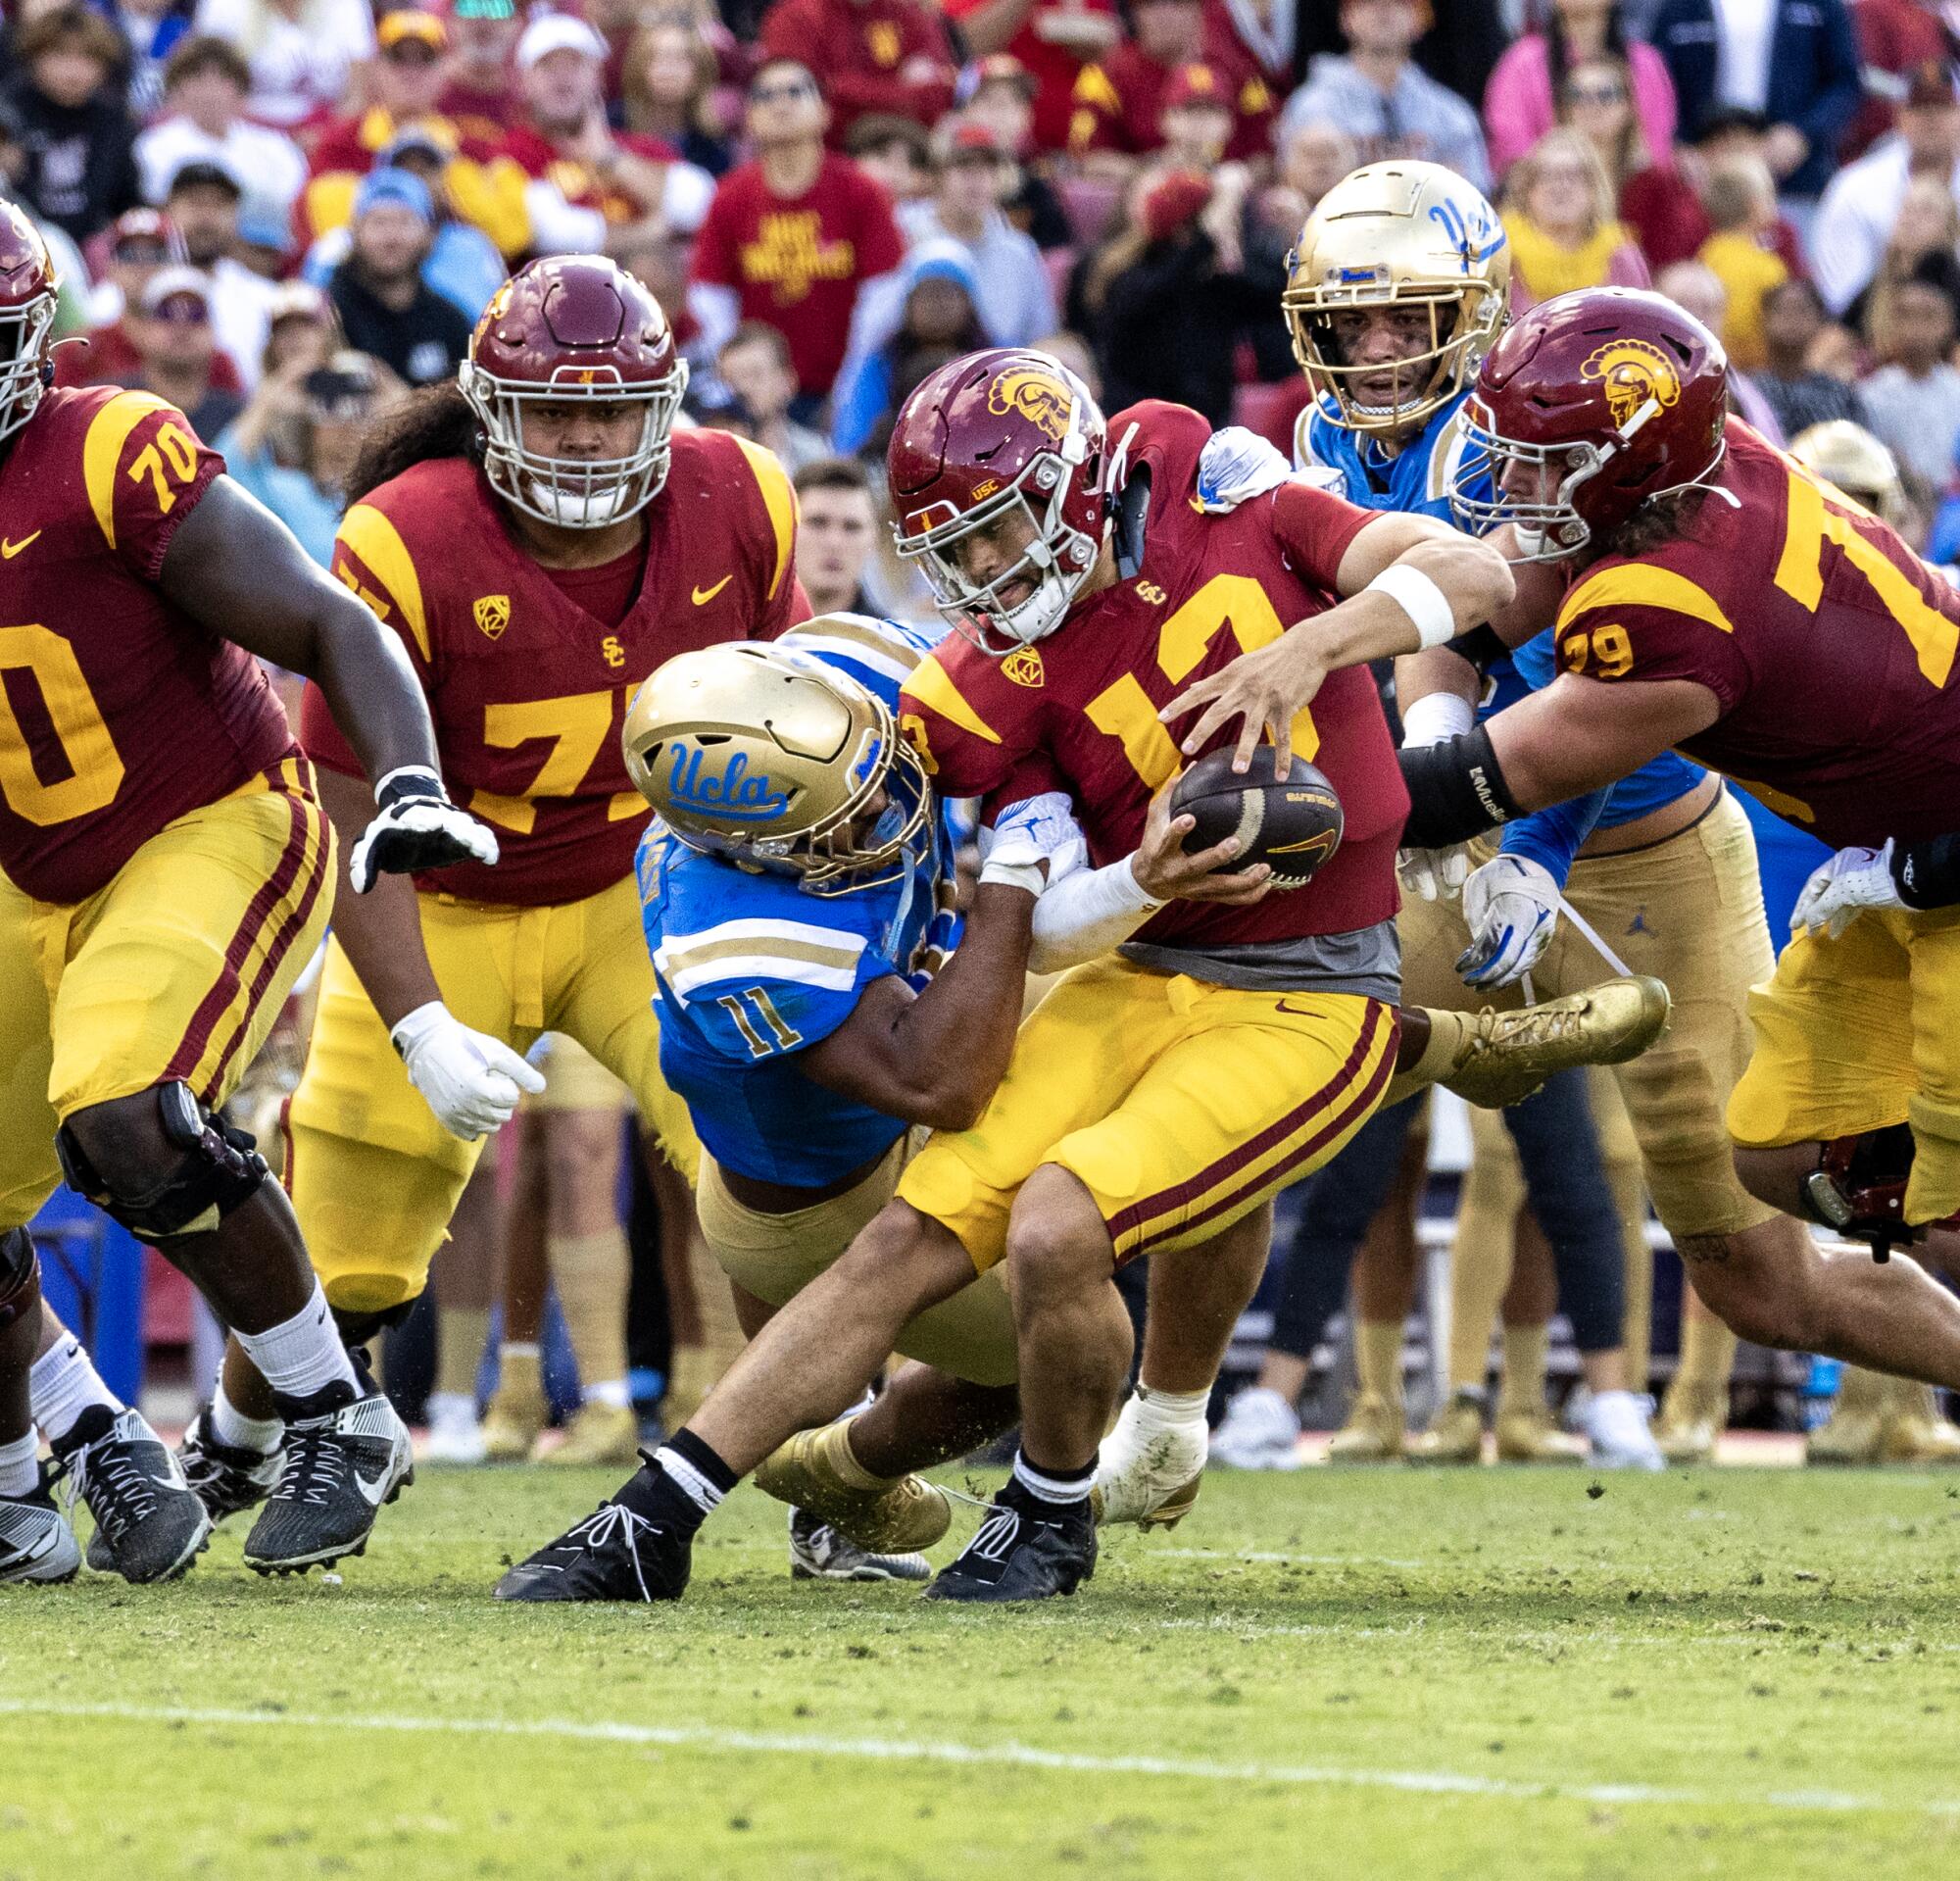 USC quarterback Caleb Williams gets sacked by UCLA defensive lineman Gabriel Murphy as his teammates look on